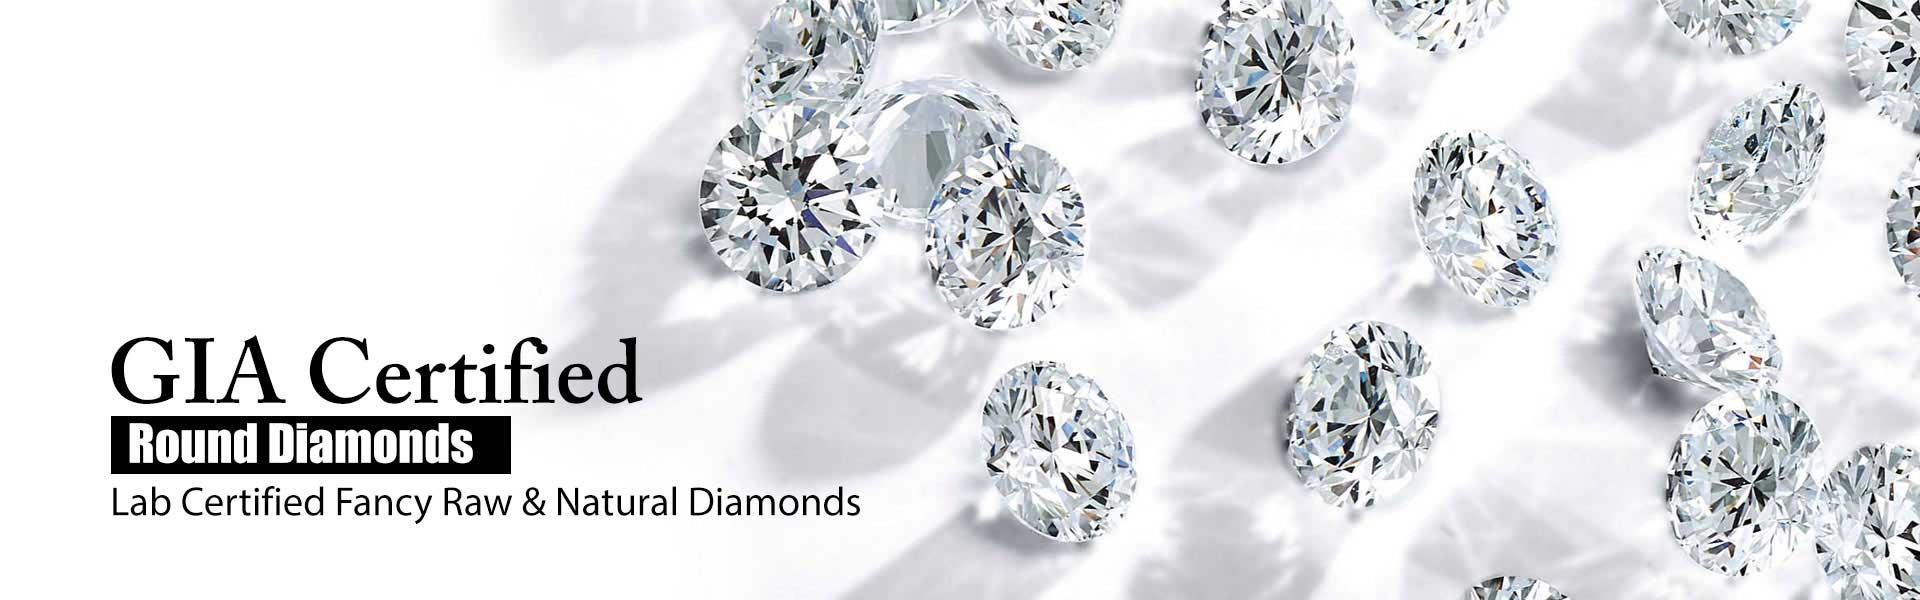  Certified Diamond  Manufacturers in Wyoming